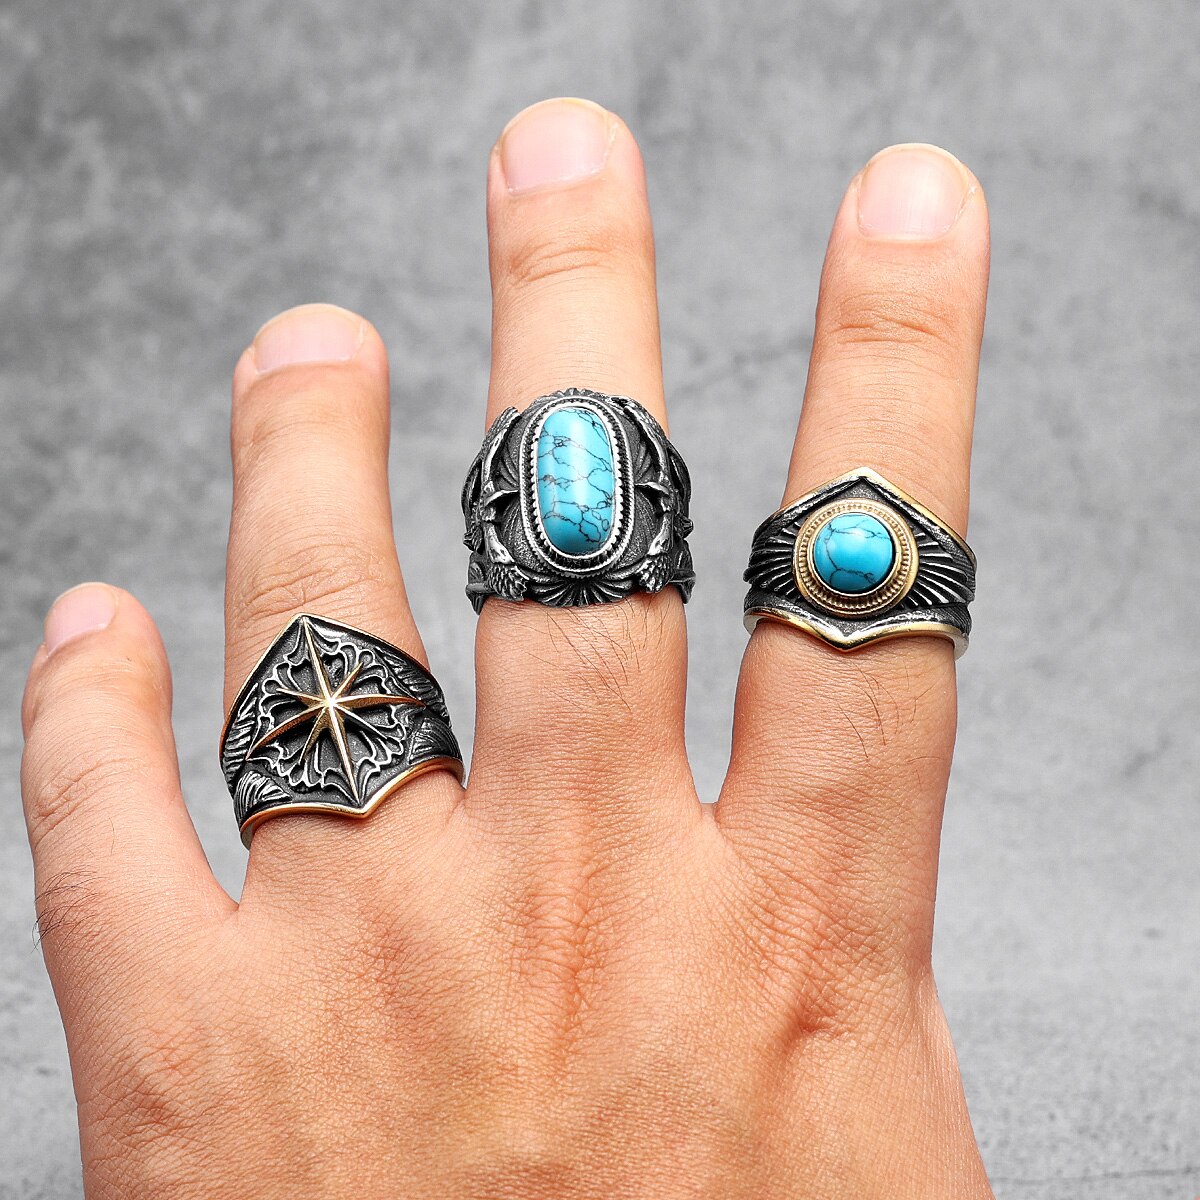 A Native Stone Ancestral Ring with a turquoise stone by Rebel Saint Co.